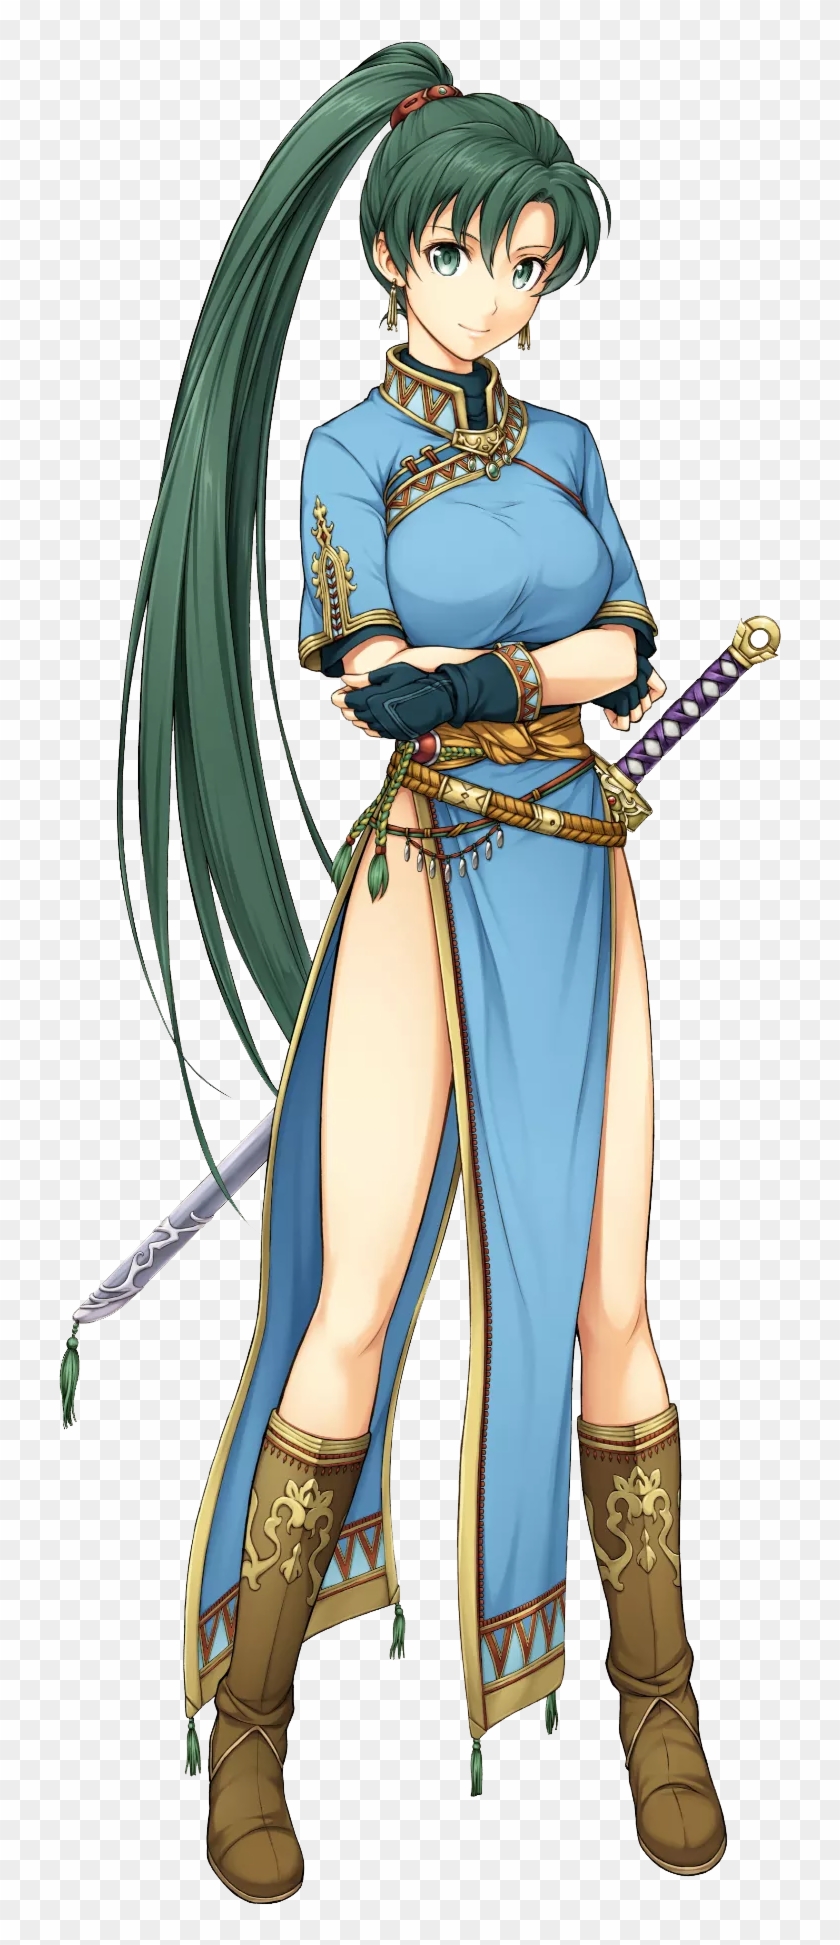 Legs For Days, Though They Work Against Her For This - Fire Emblem Heroes Lyn Build #1187430